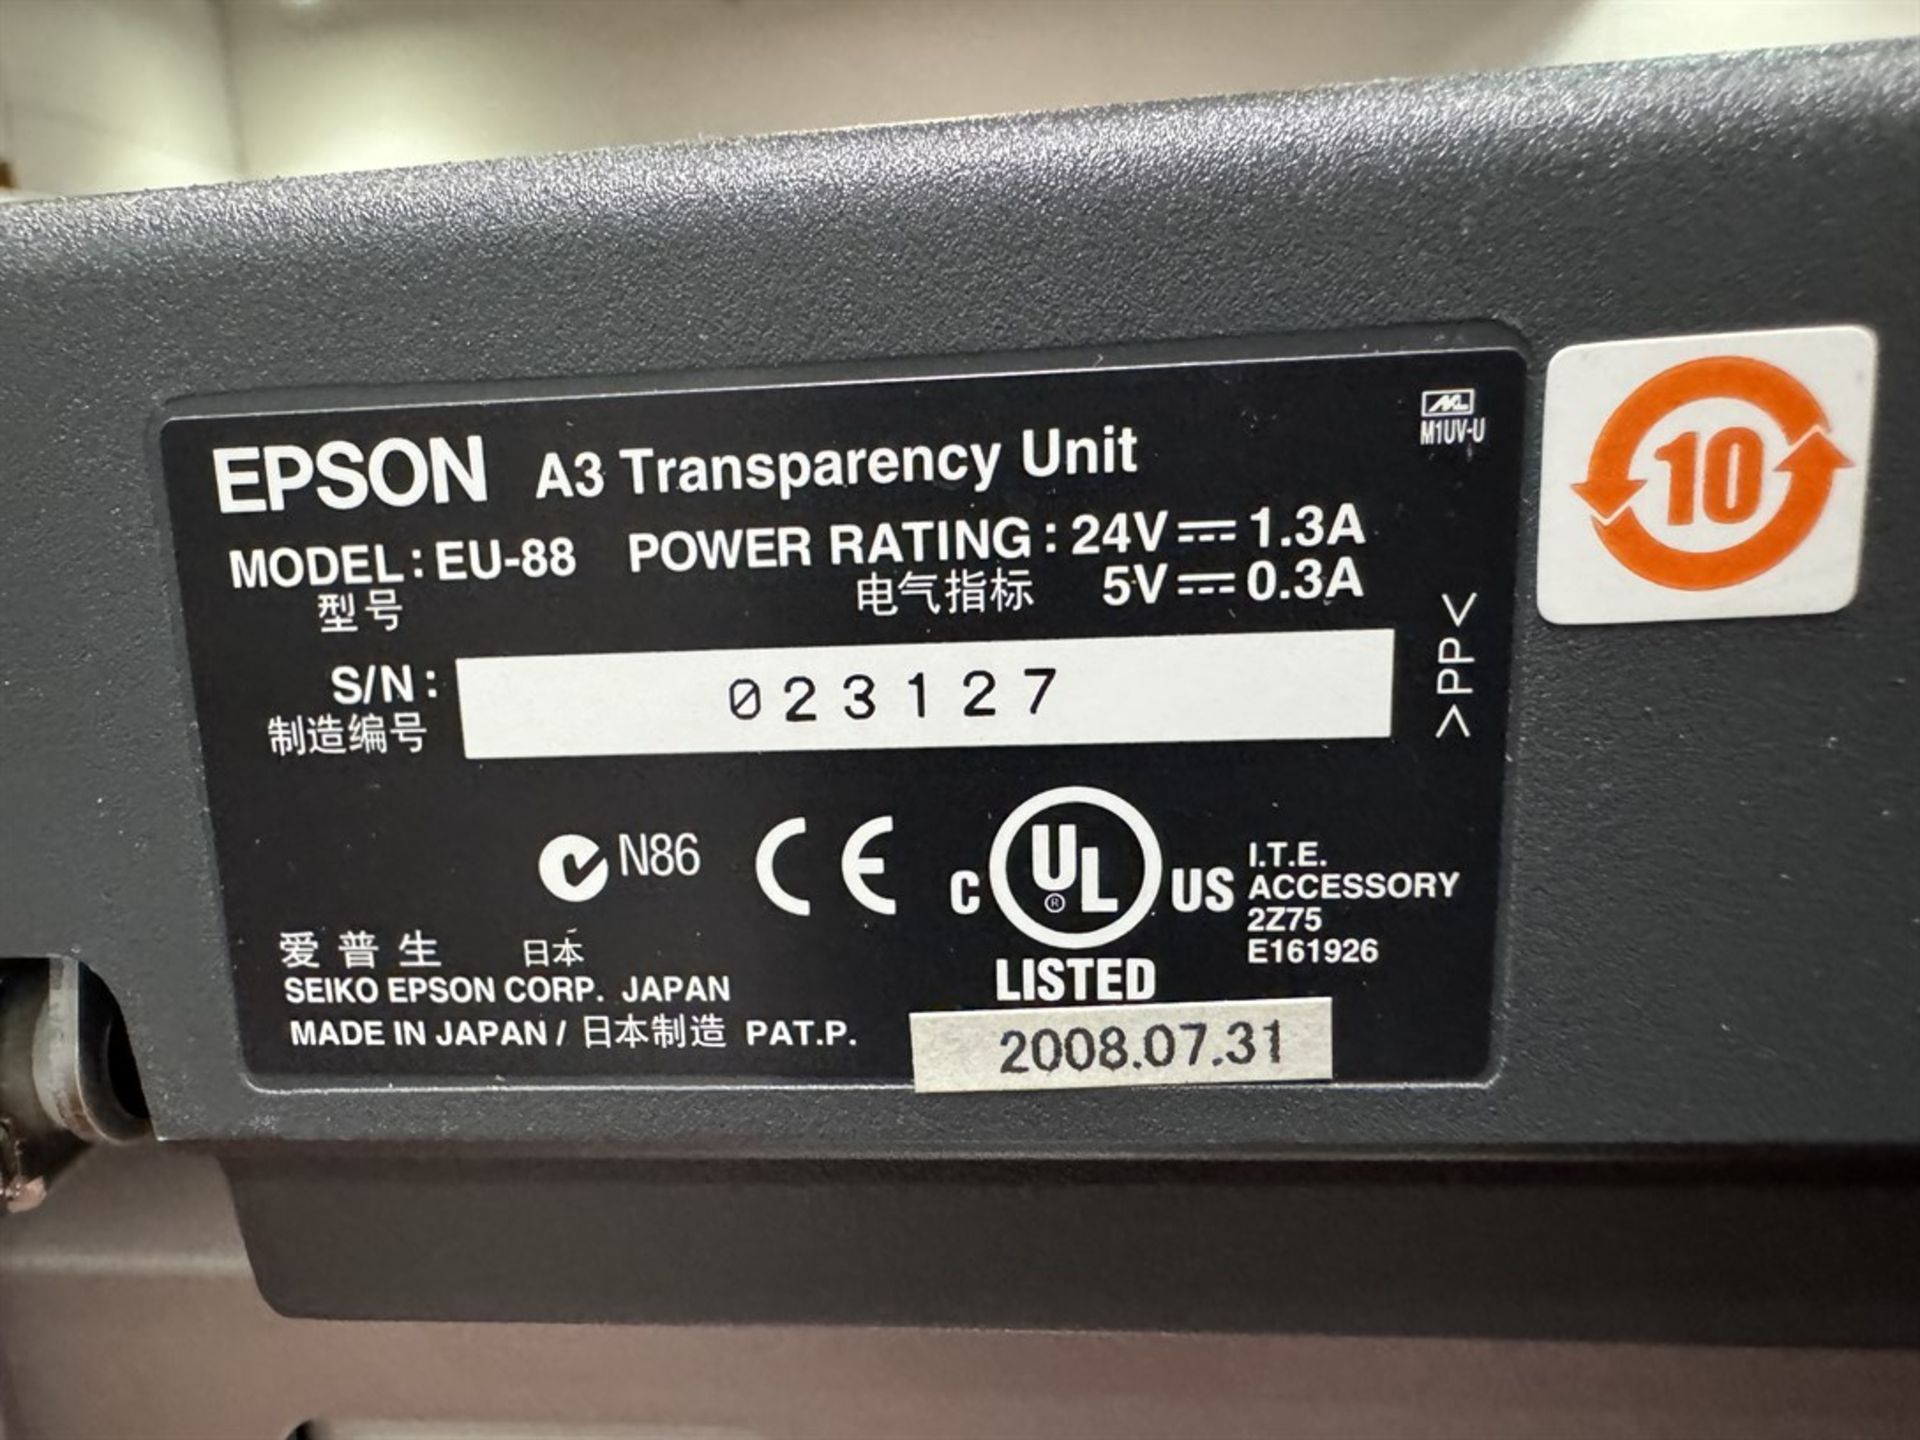 EPSON Expression 10000 XL Flatbed Scanner, s/n FVU0015800, w/ EPSON A3 Transparency Unit - Image 6 of 7